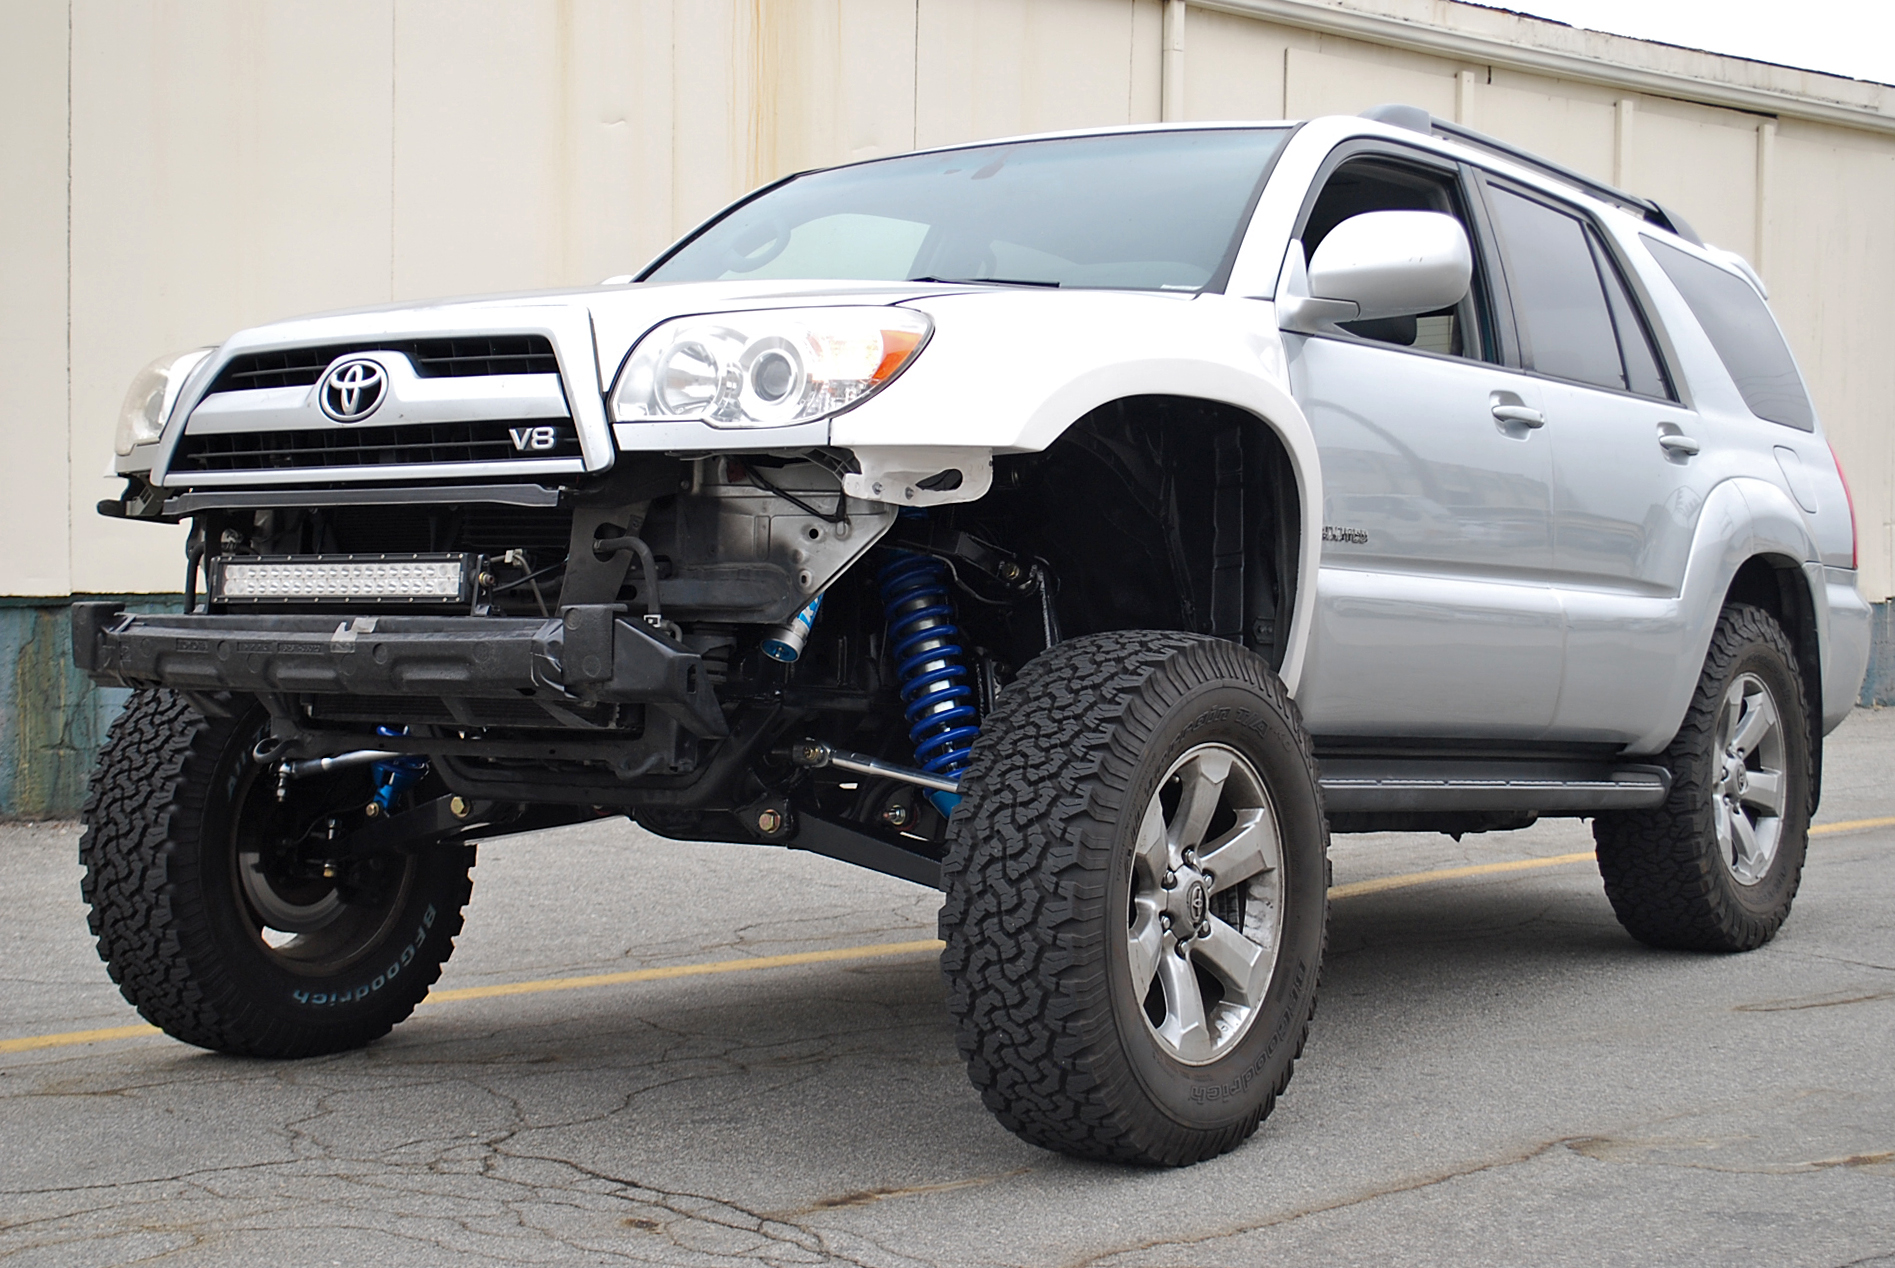 tacoma long travel front suspension